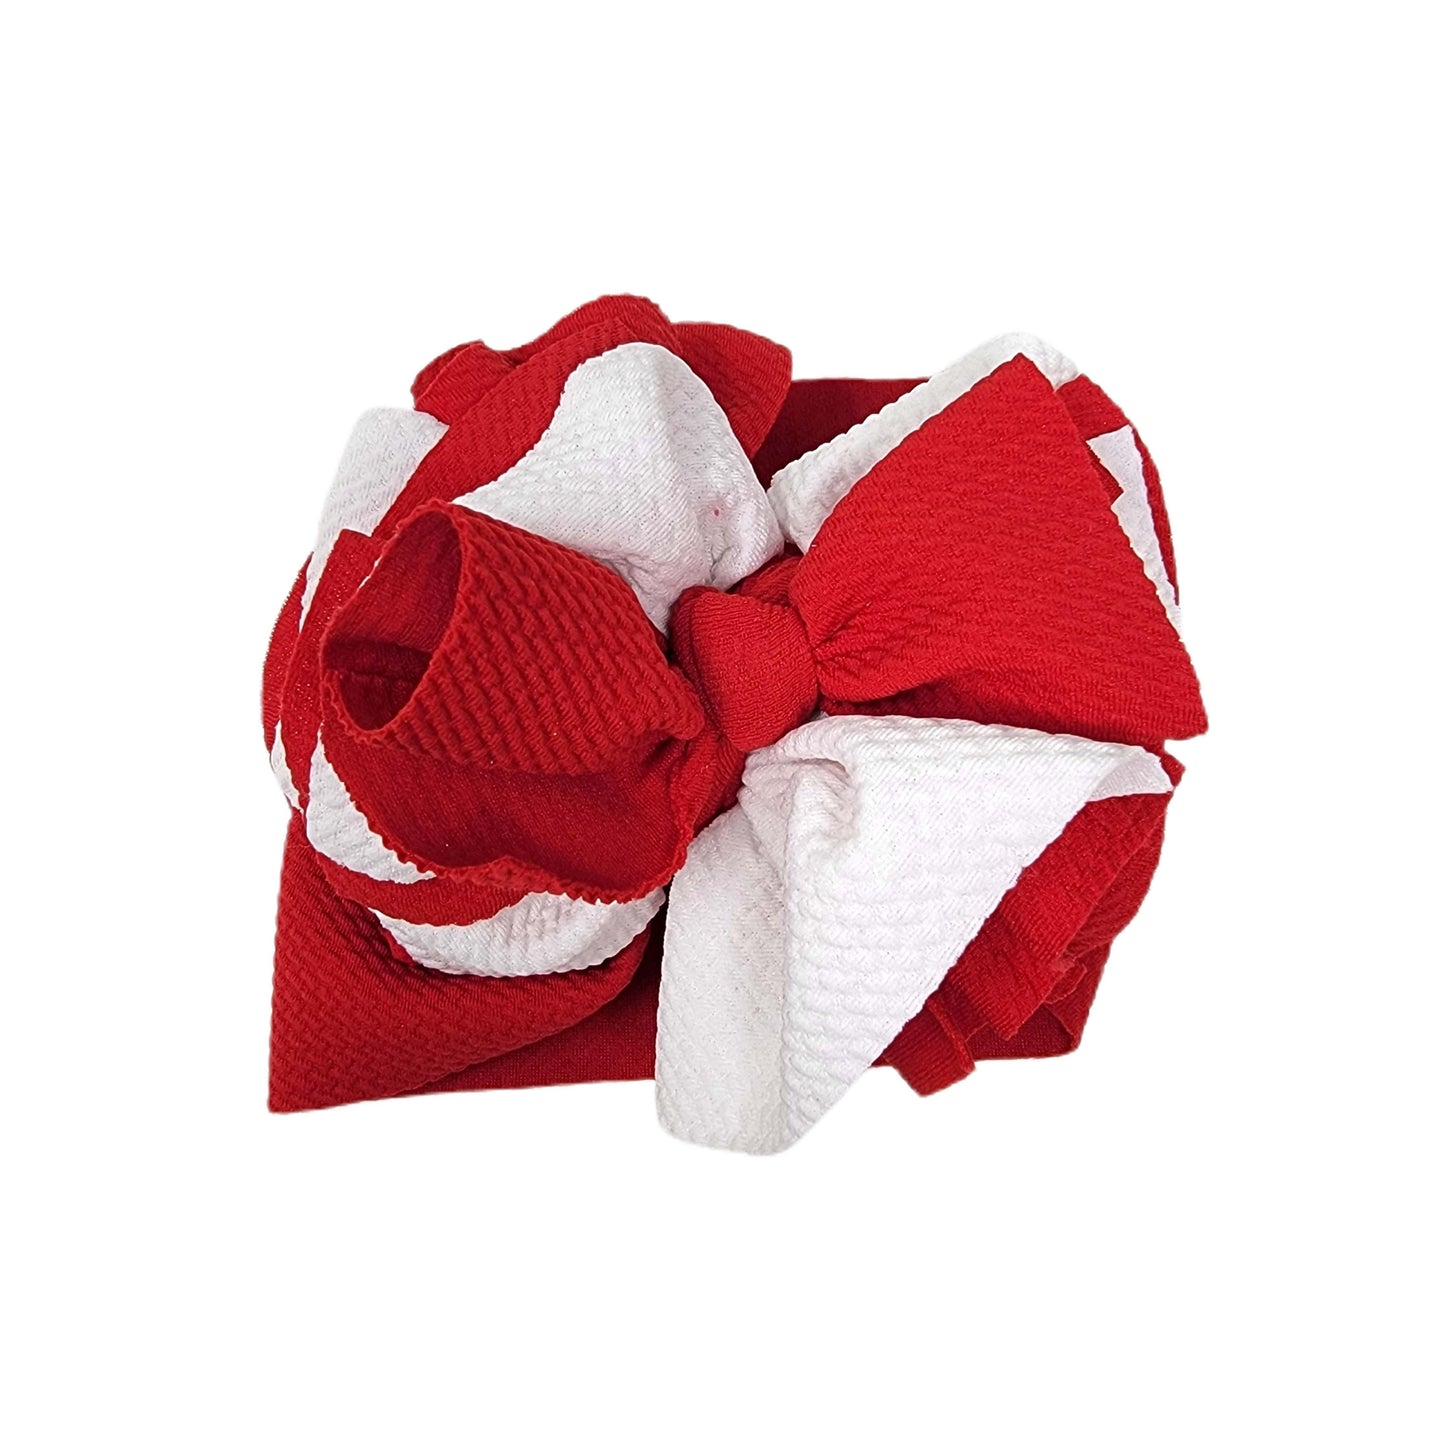 Red & White Sassy Fabric Bow Headwrap - 5"